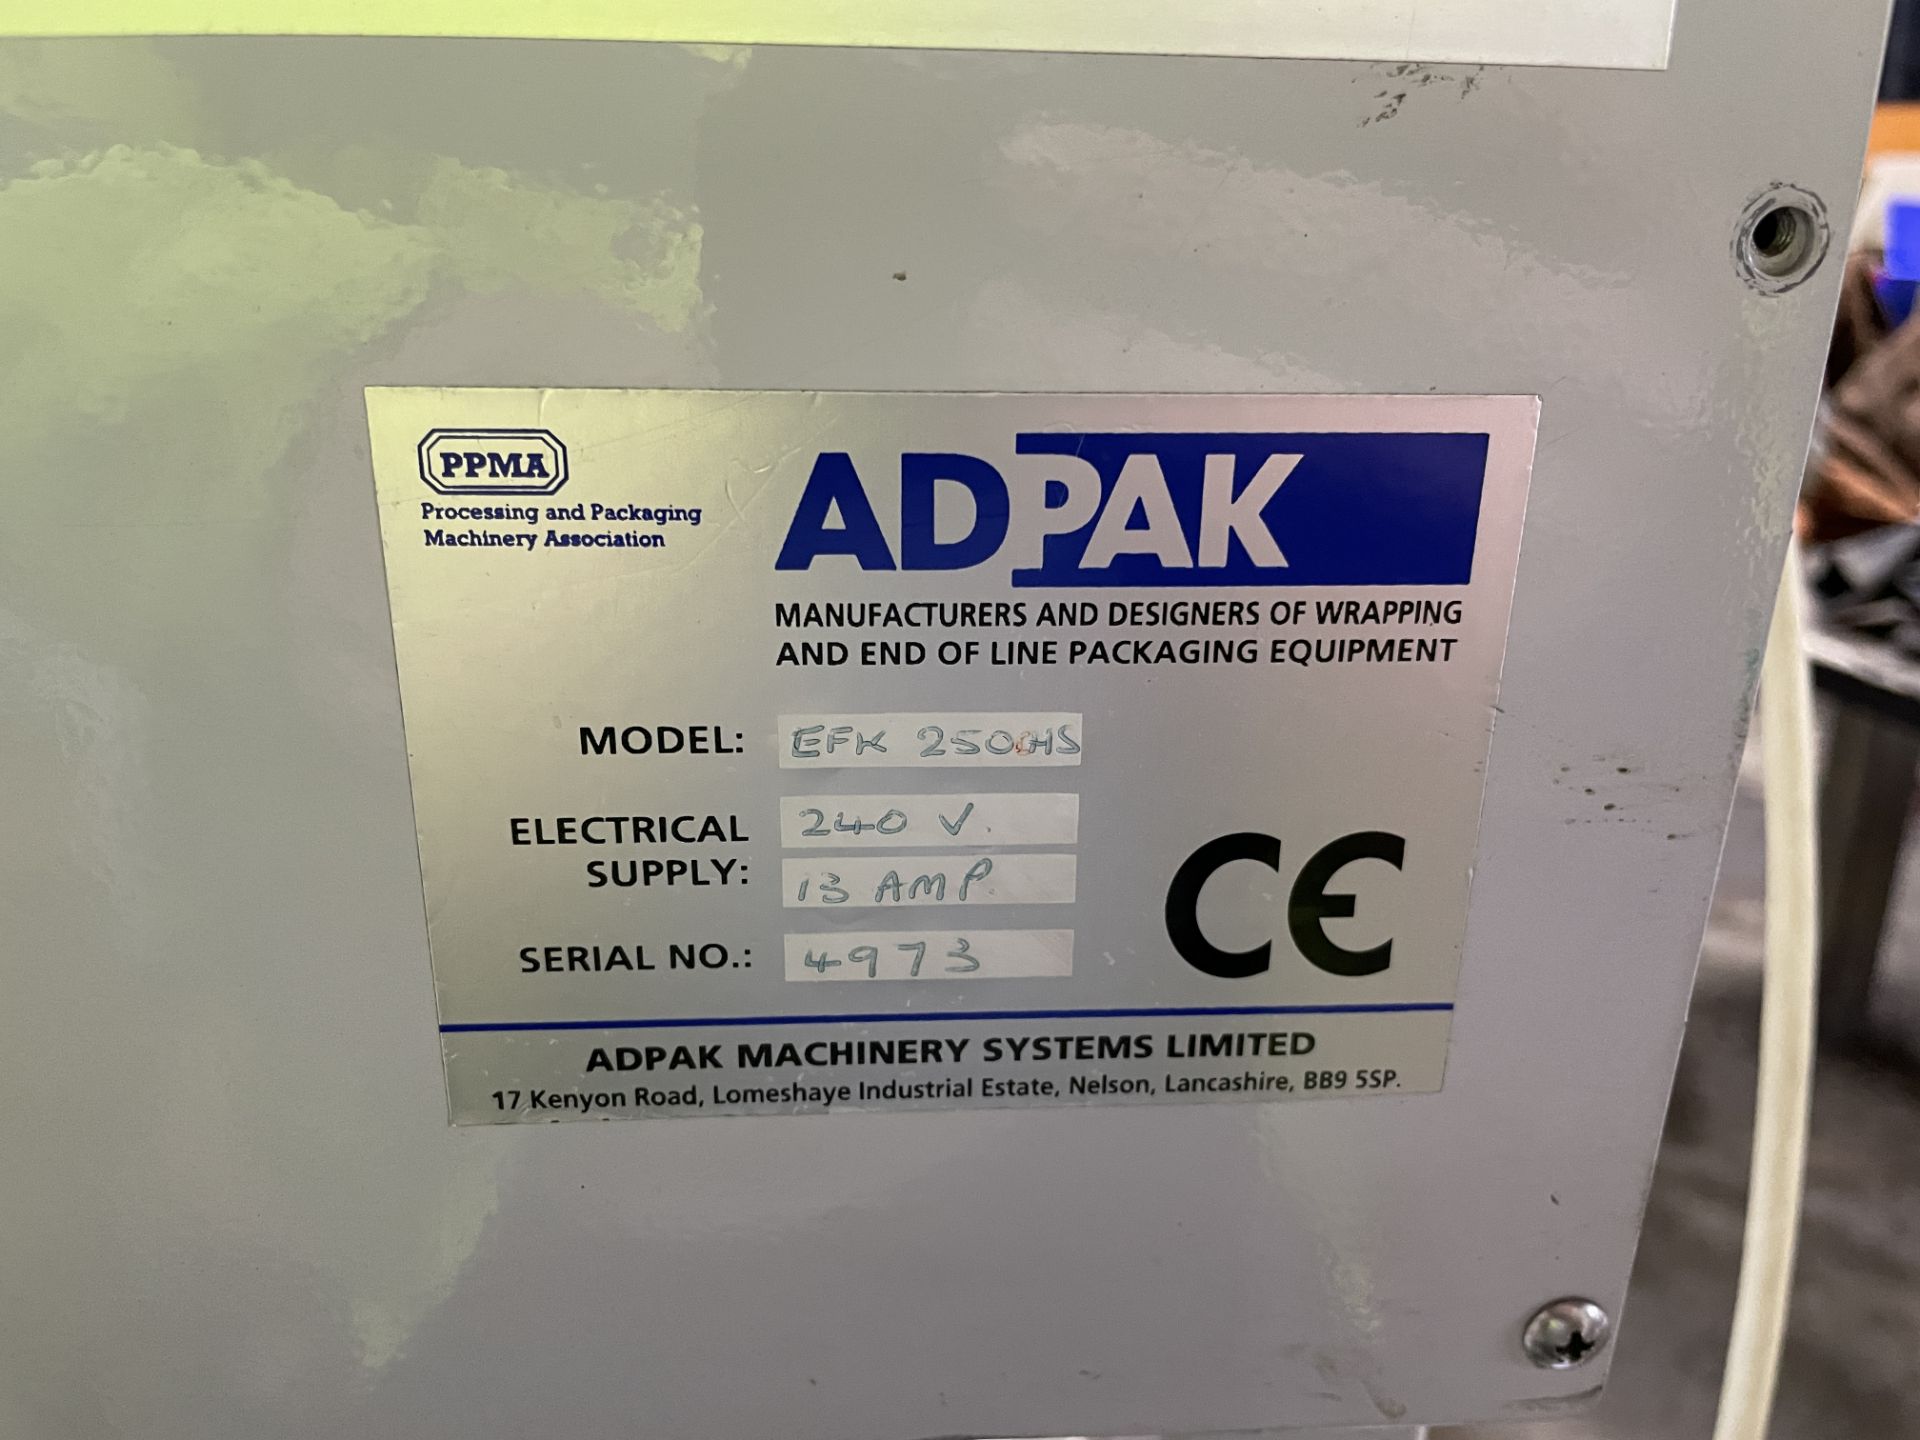 Adpak EFK 250 HS L Sealer, serial no. 4973, 13amp, 240V, loading free of charge - yes, lot located - Image 8 of 9